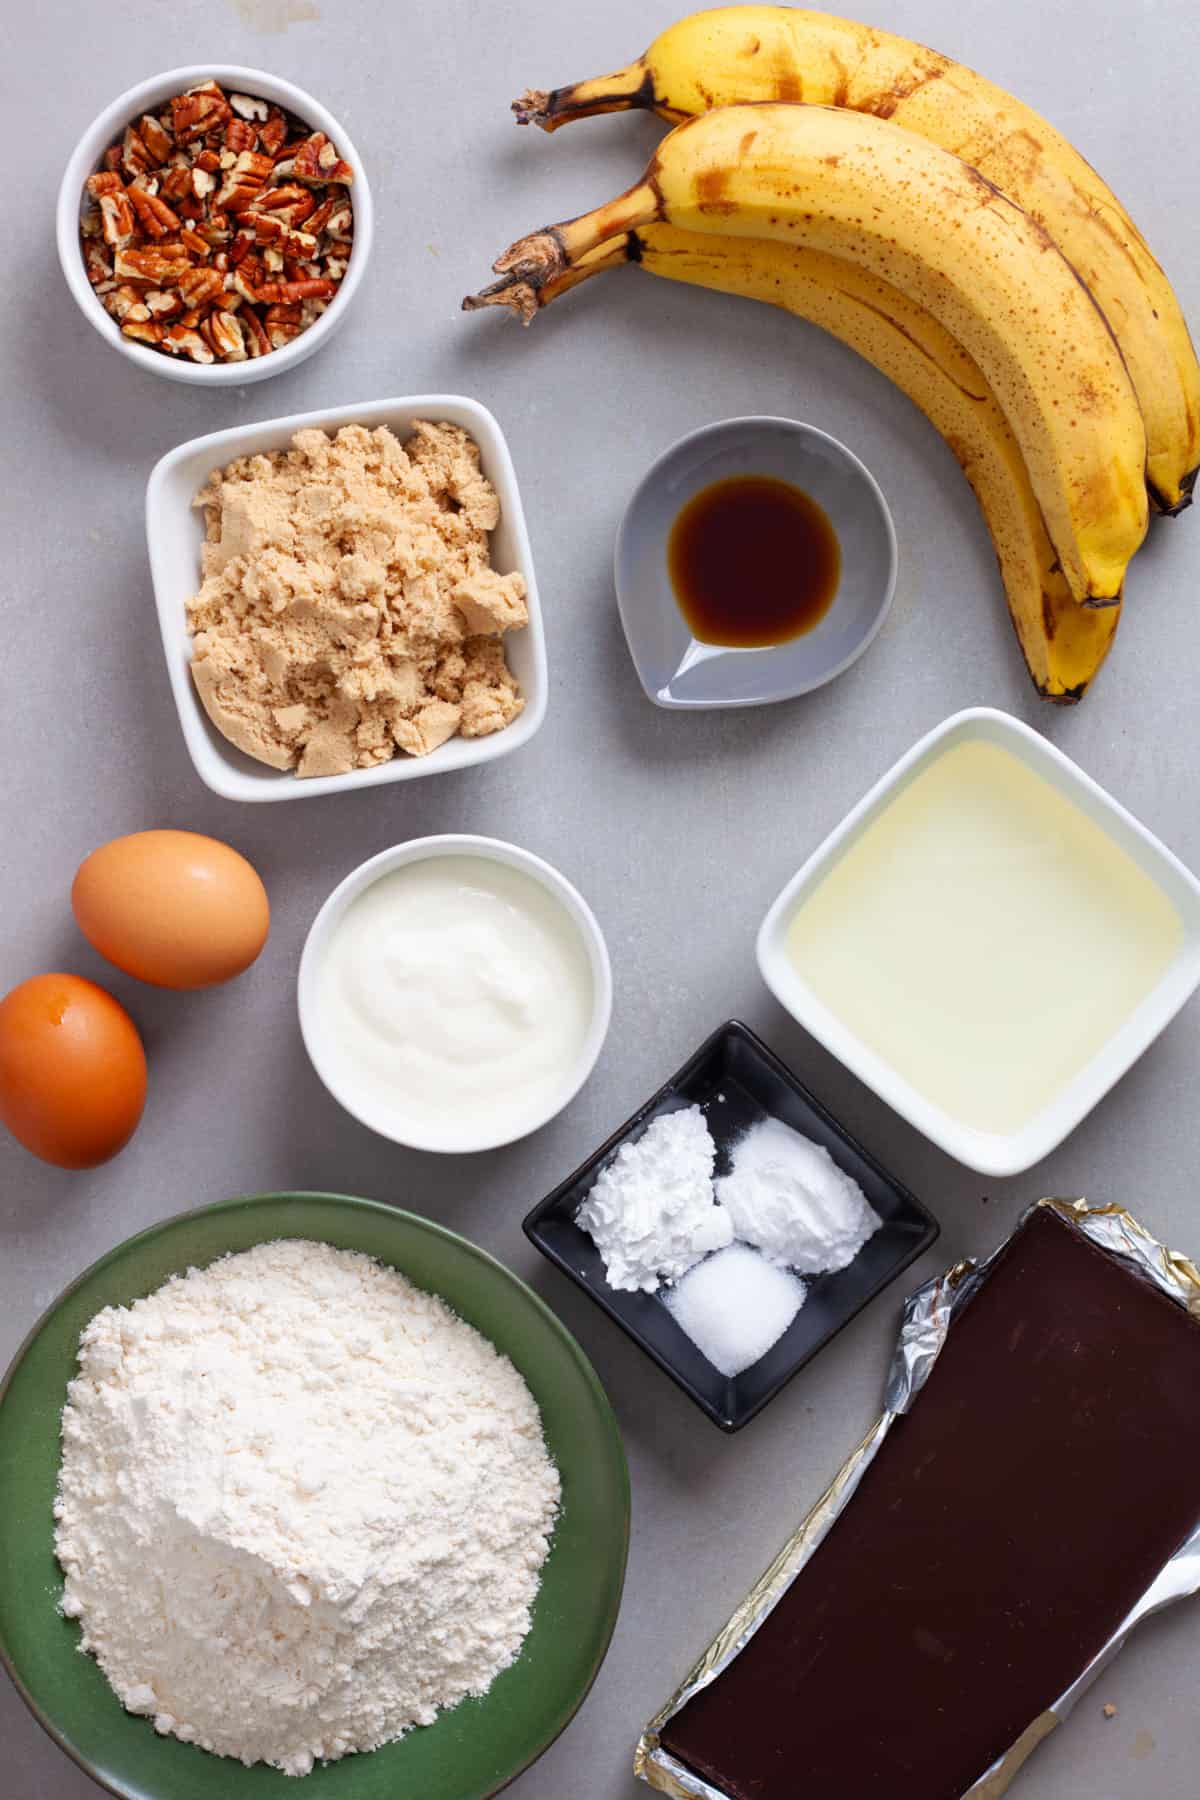 Ingredients for banana chocolate chunk muffins on a gray table.